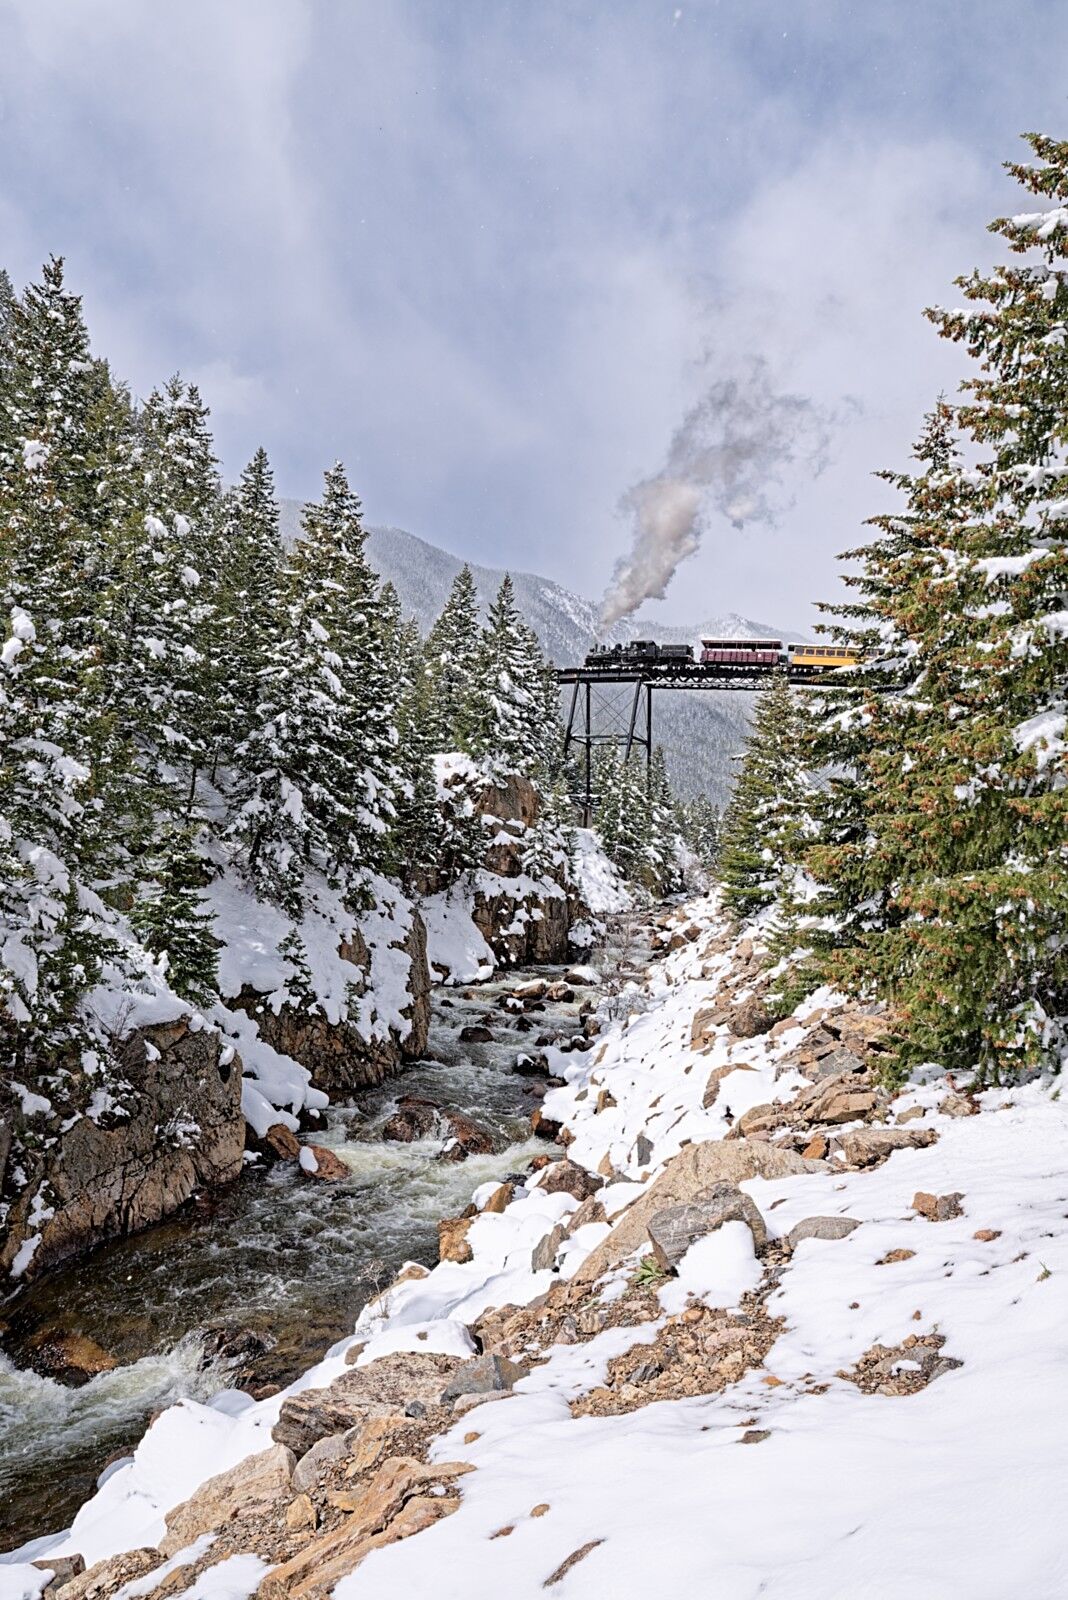 A heavy spring snow blankets the trees as a Silver Plume bound train crosses Devils Gate Bridge.